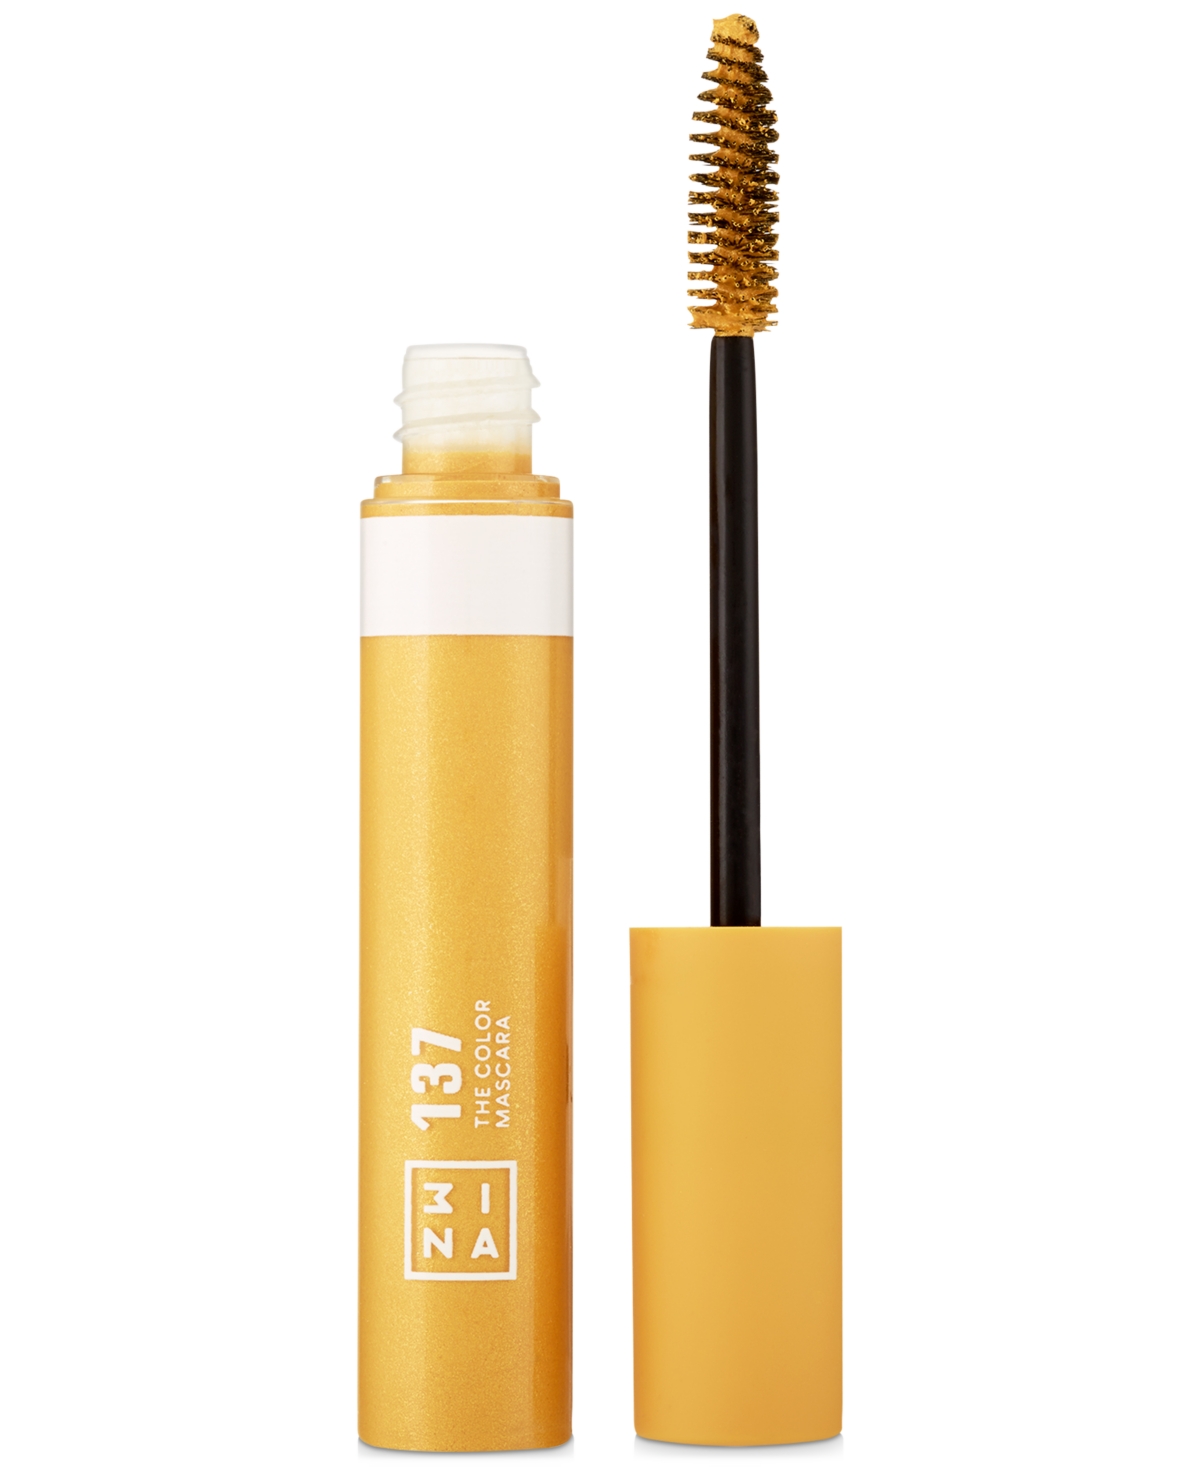 3ina The Color Mascara In - Yellow